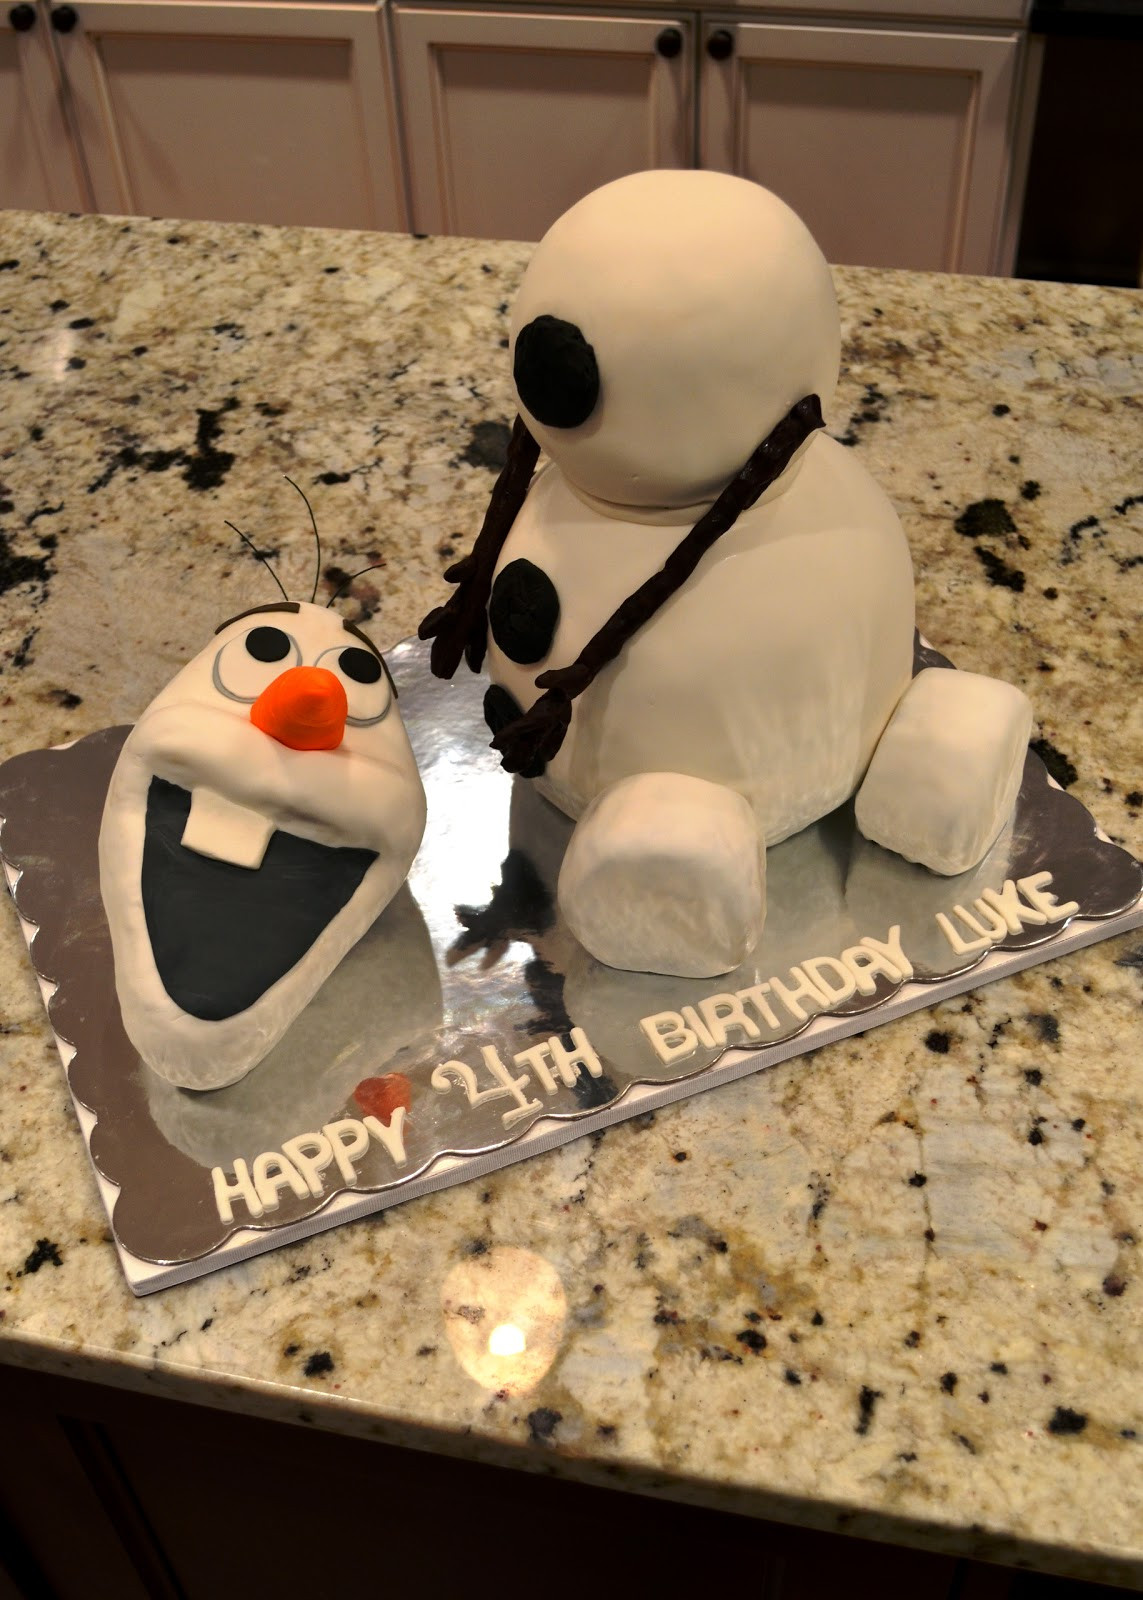 Olaf Birthday Cakes
 Pure Delights Baking Co Frozen "Olaf" Cake